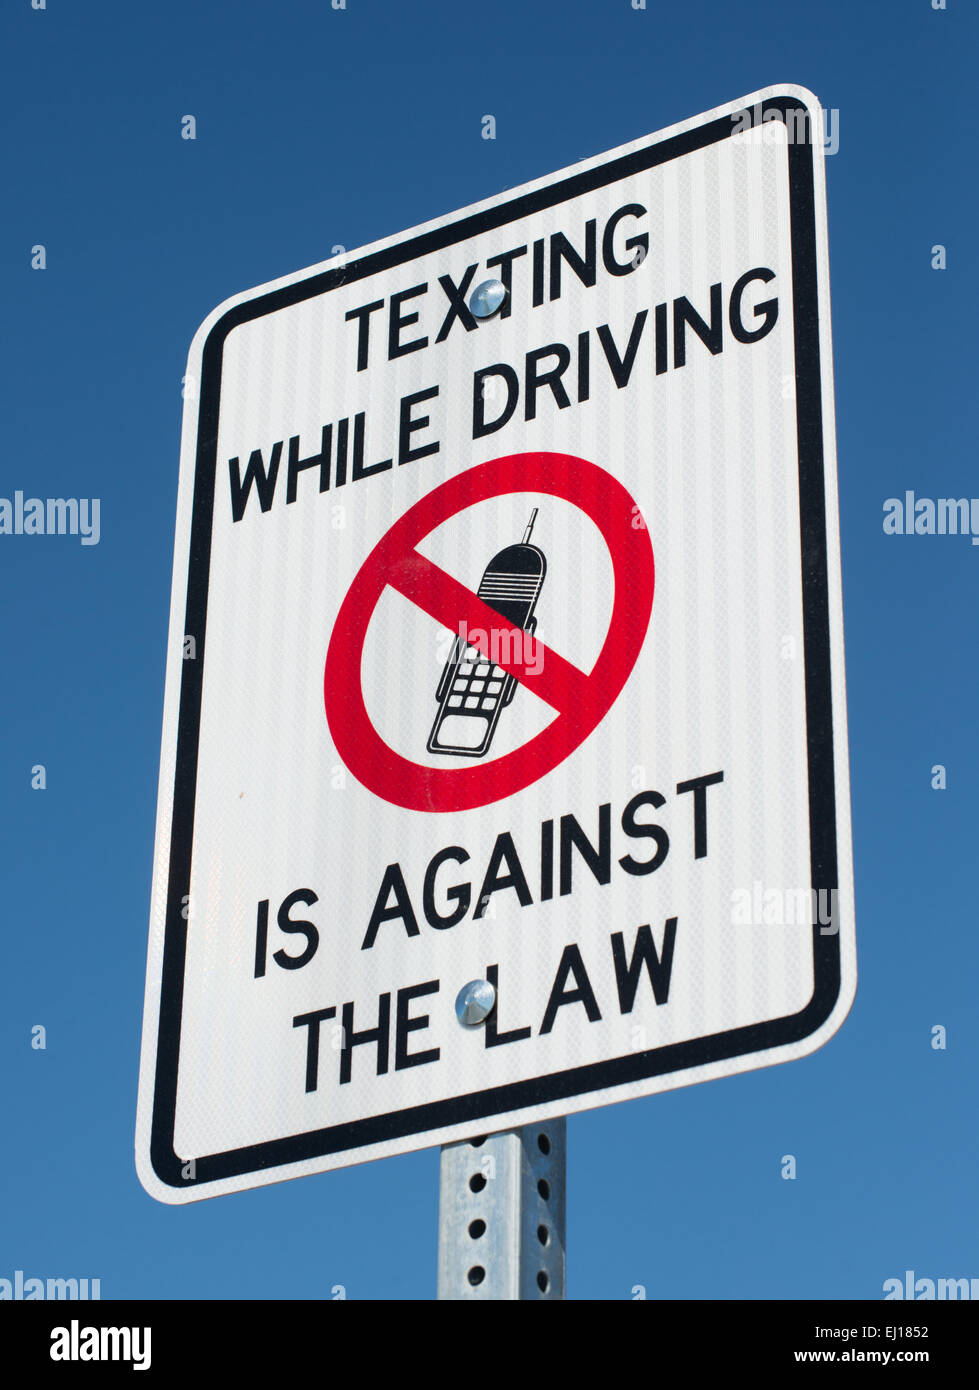 A Sign Warning Drivers Texting While Driving is Against the Law Stock Photo